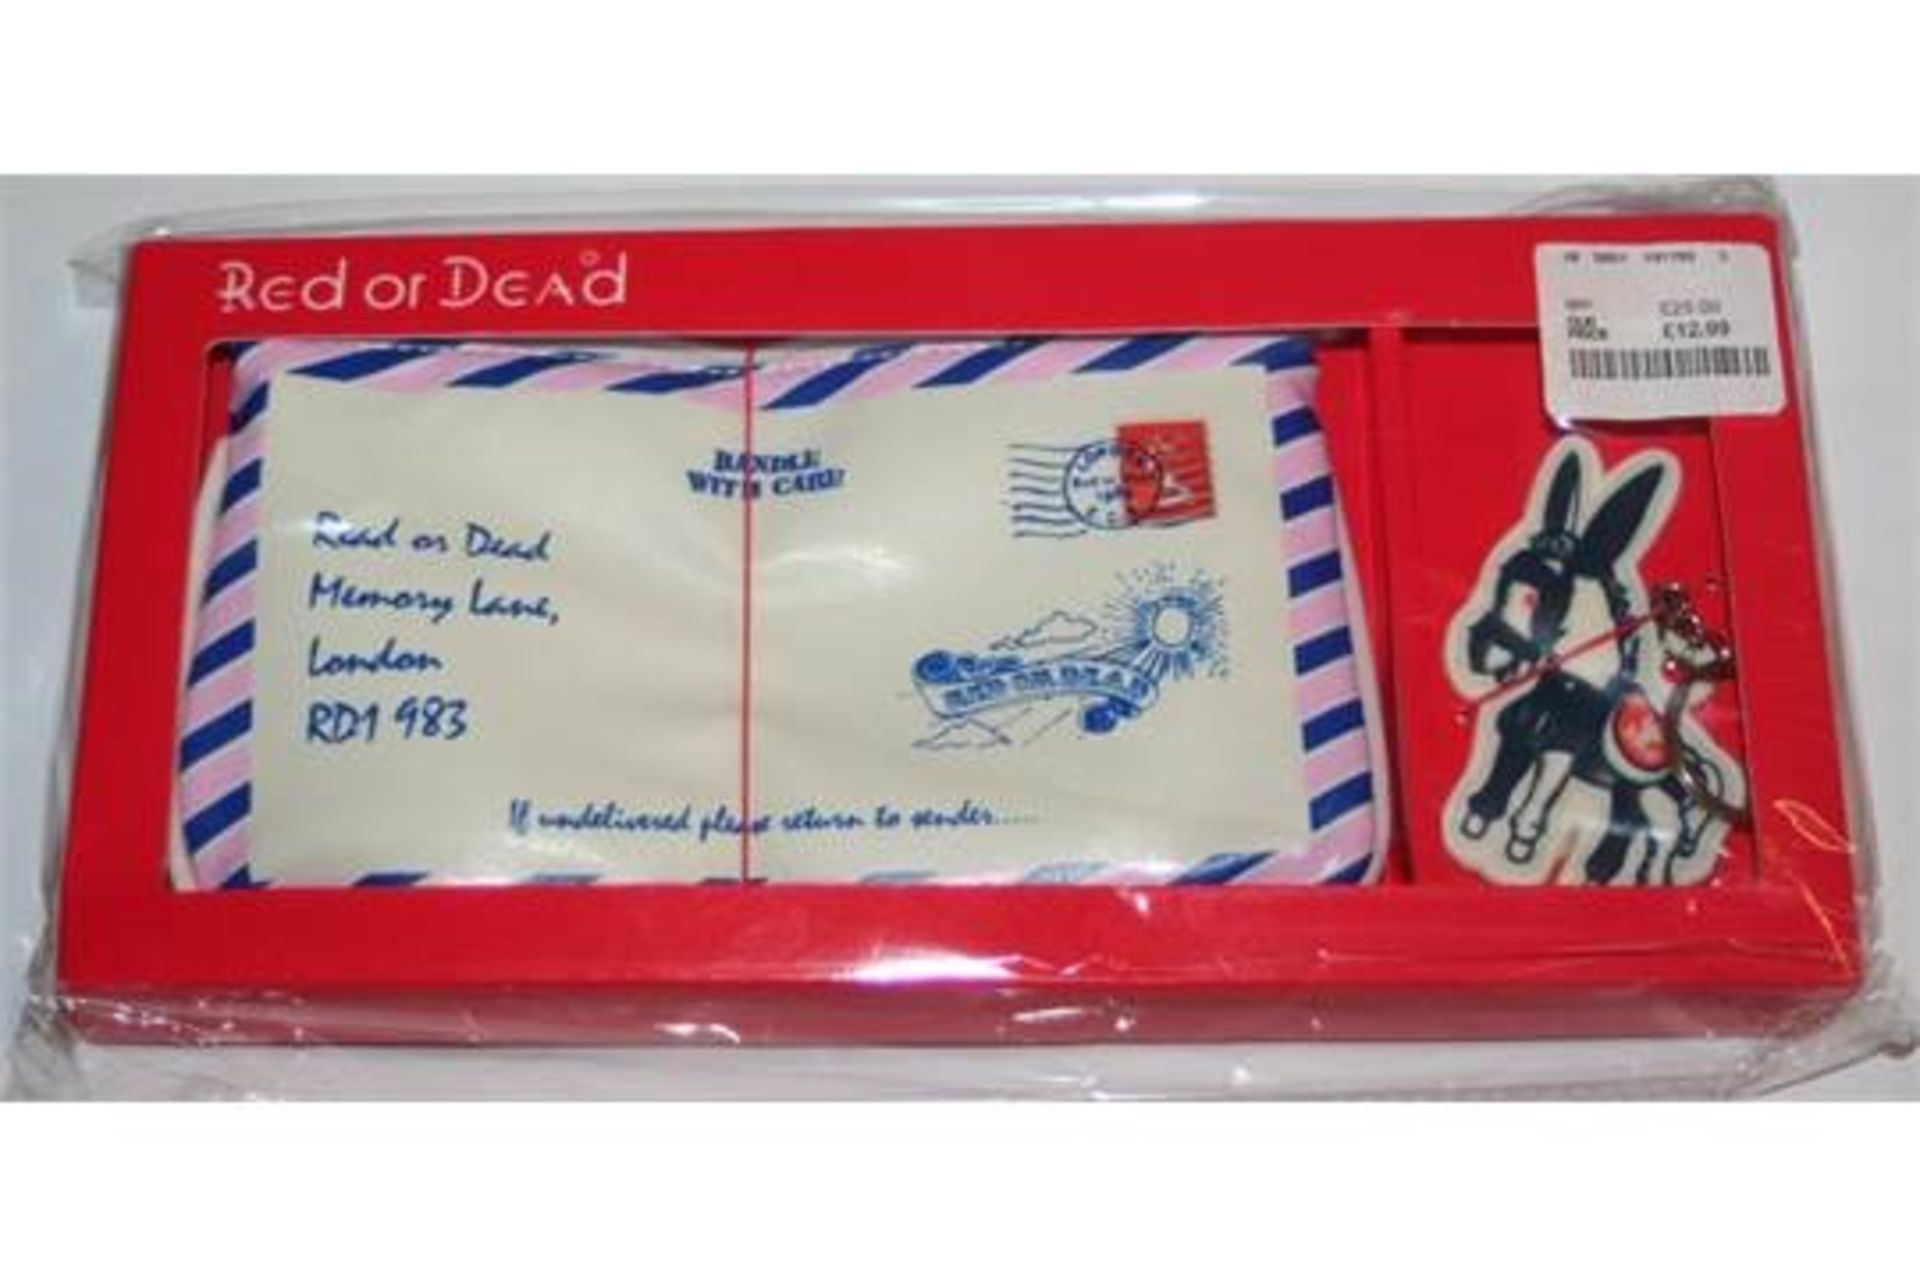 10 x Red or Dead Airmail Bag Purses With Keyrings - Fantastic Gift Sets - Brand New in Packets! - - Image 7 of 8